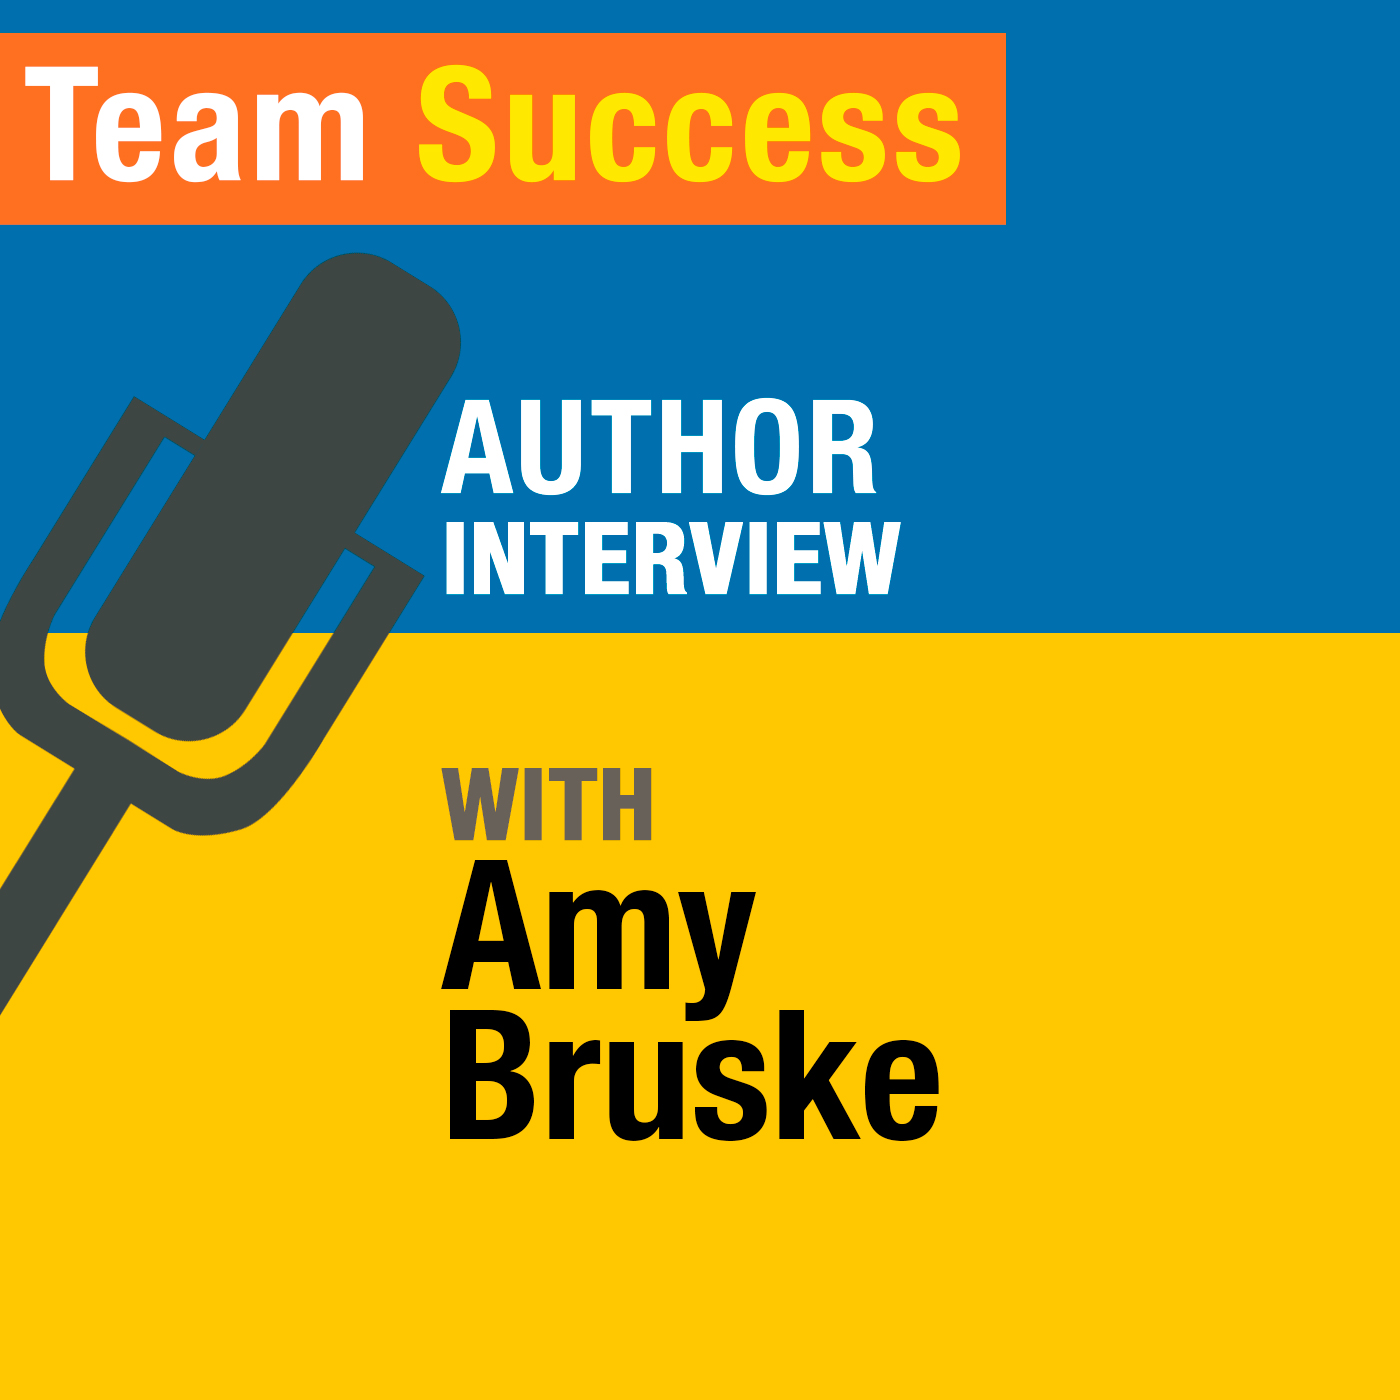 An Interview With Amy Bruske